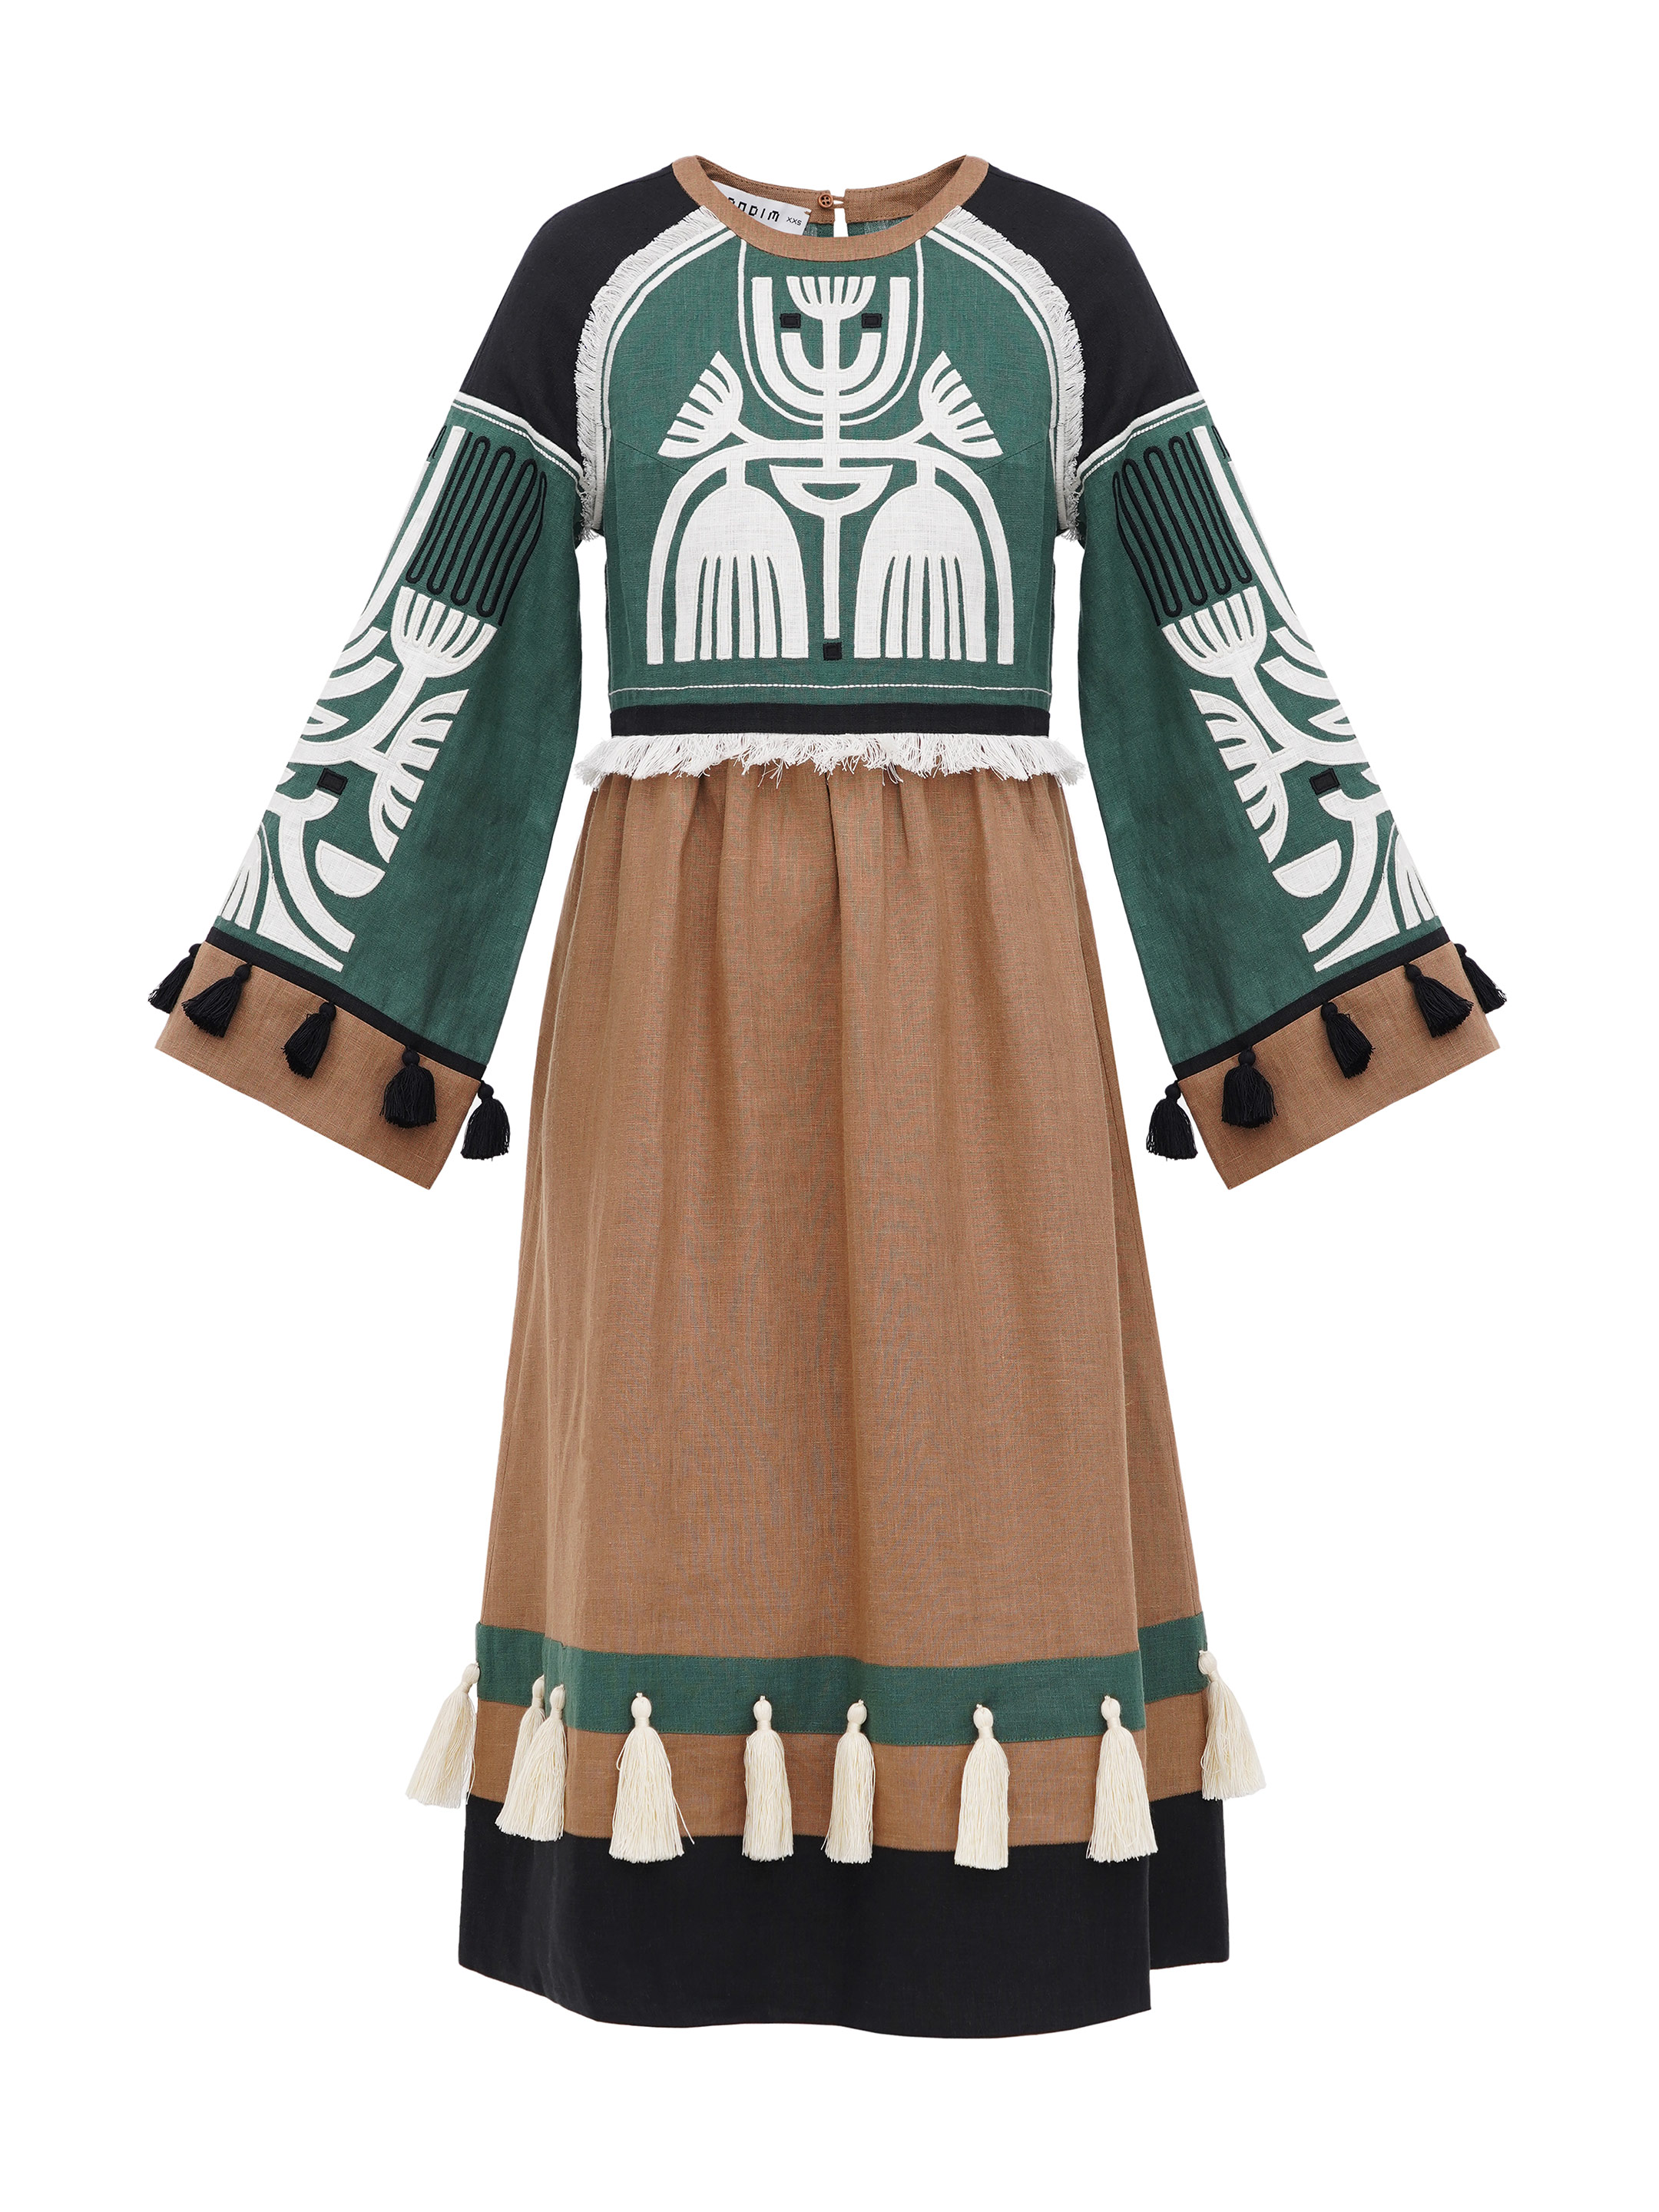 Green dress with black applique and embroidery VILHA buy in Kyiv, price —  Etnodim